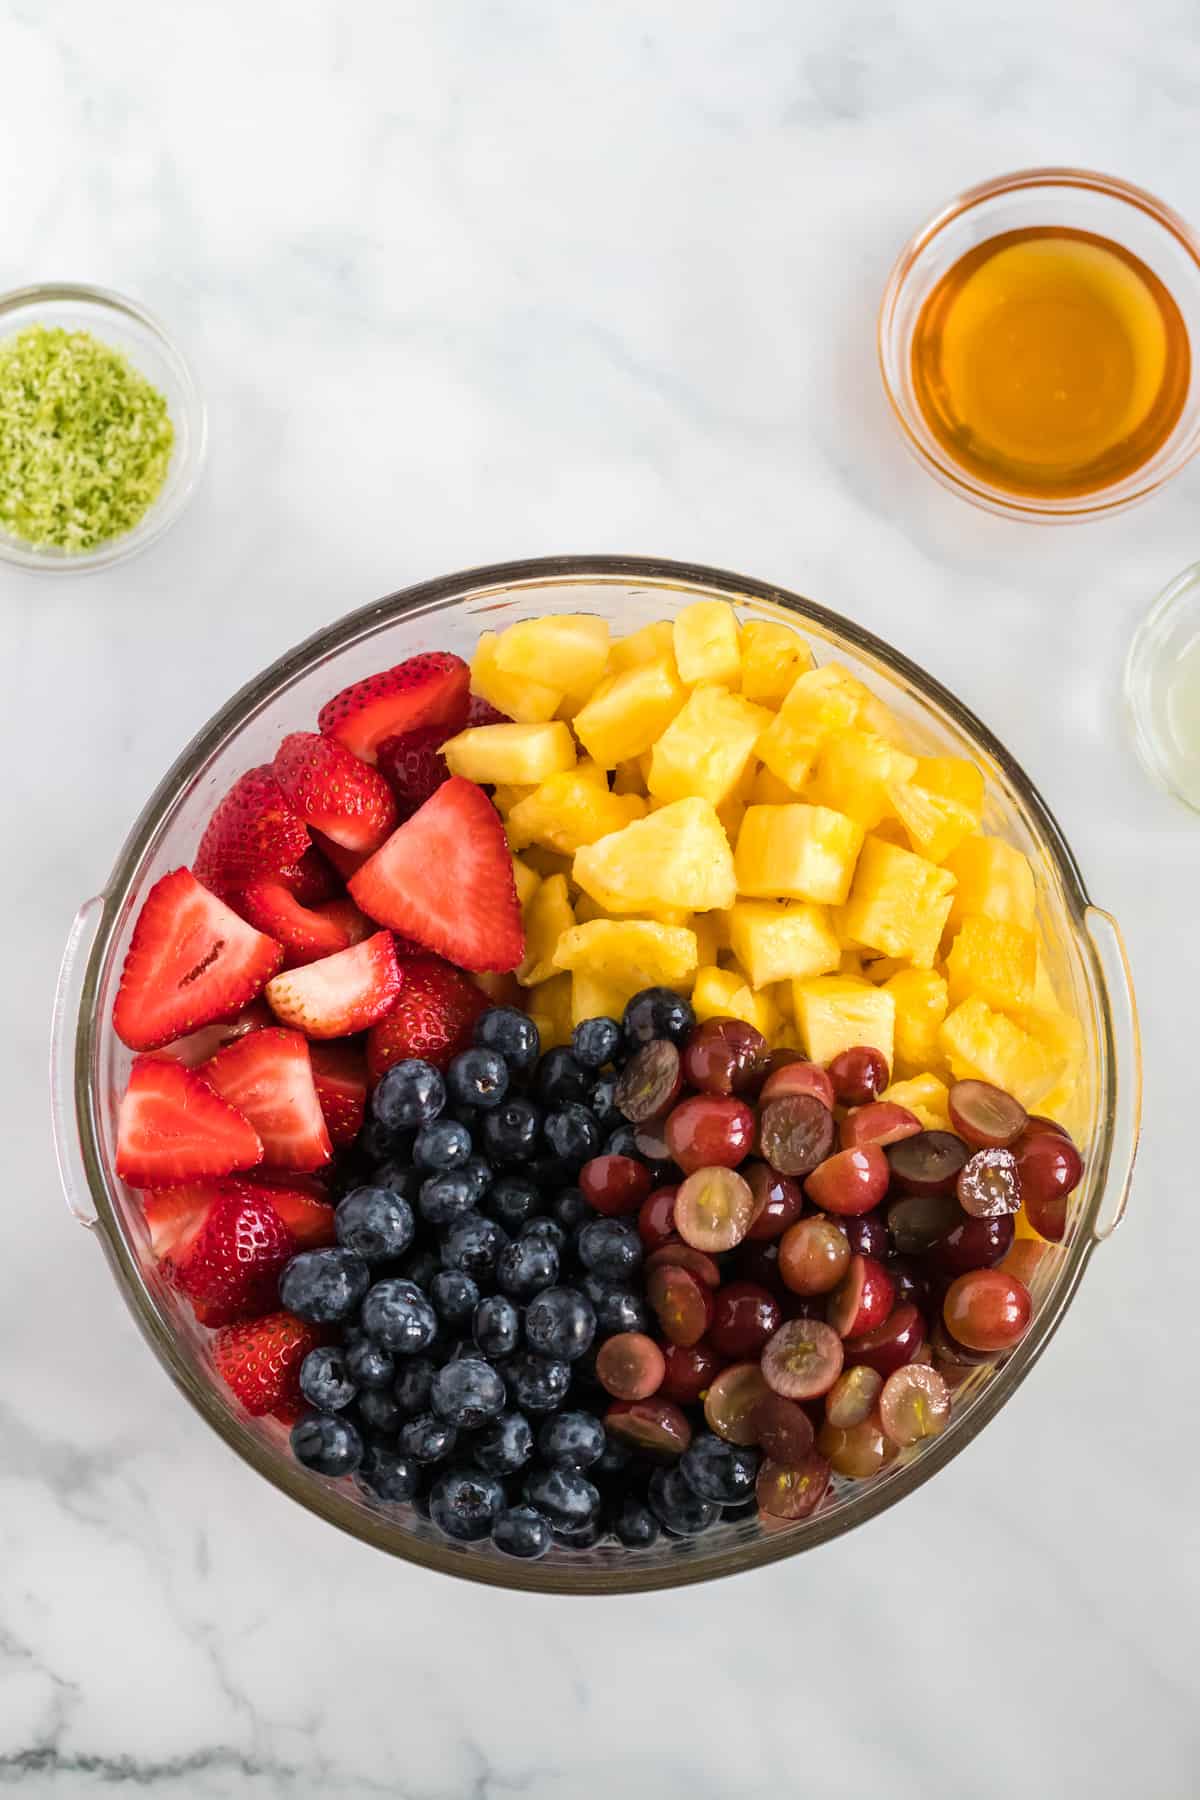 a large glass bowl with the prepared strawberries, blueberries, grapes, and pineapple in it